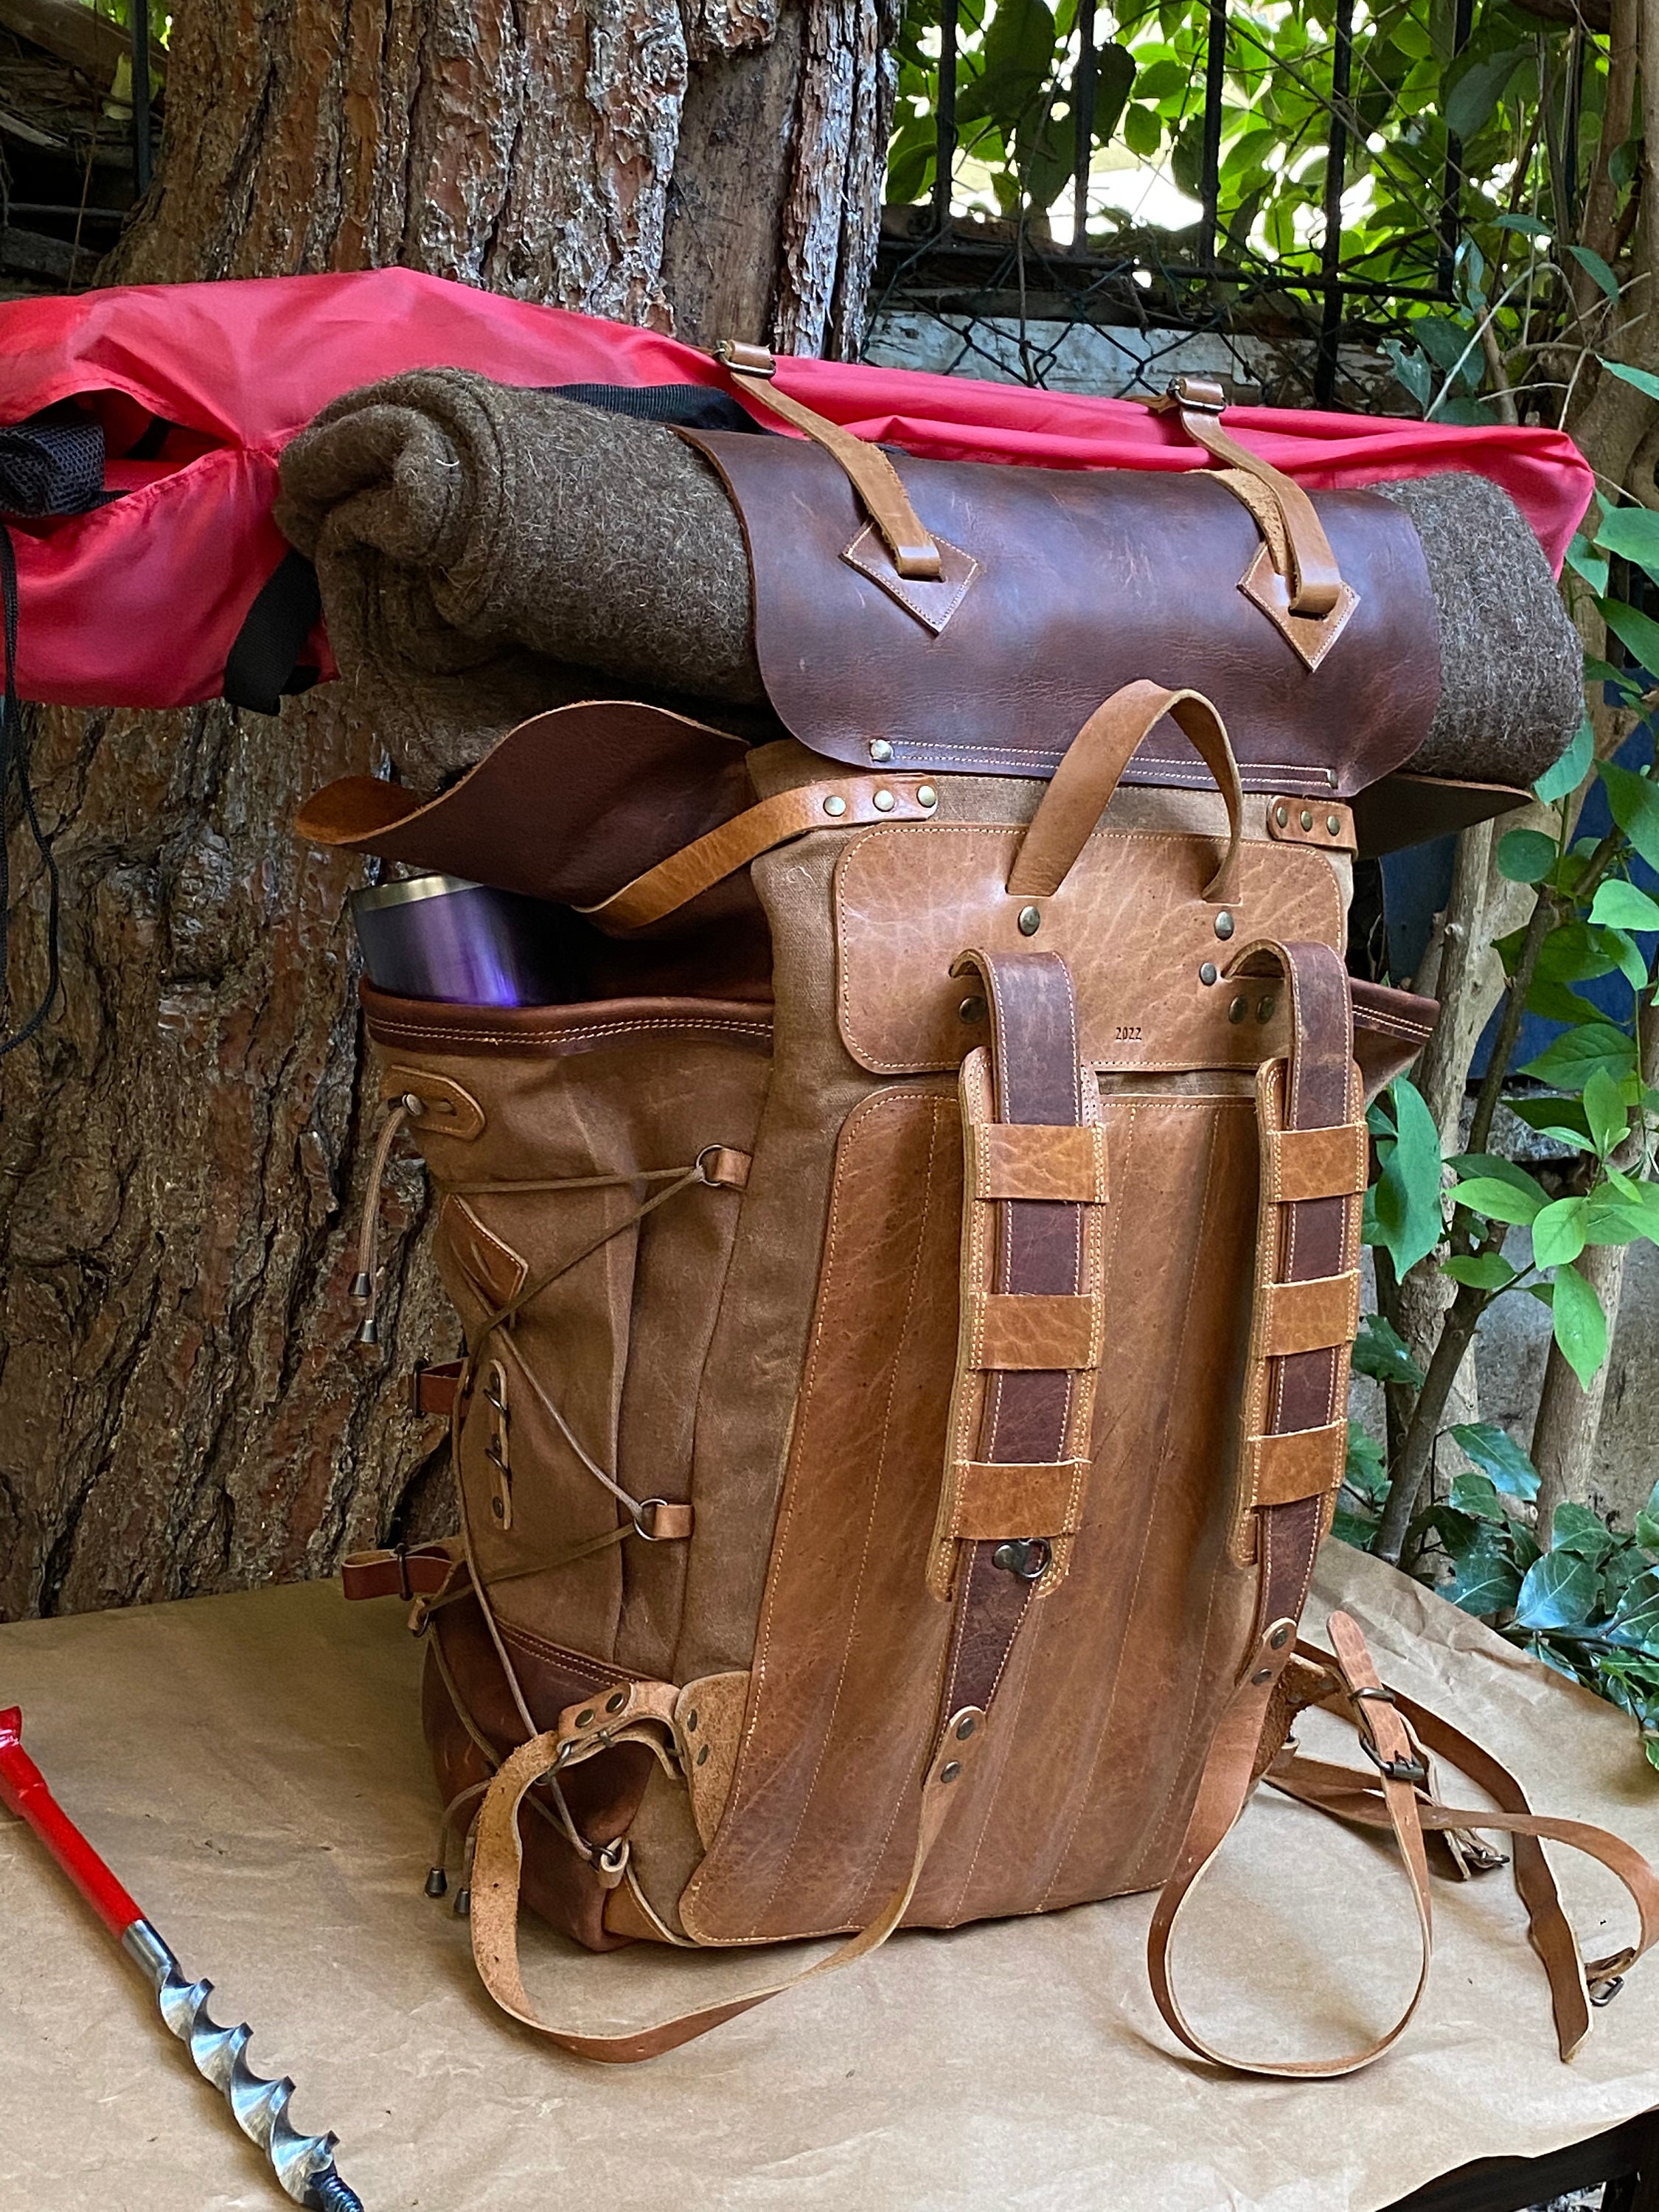 80L Extra Large Camping-Bushcraft Canvas Leather Backpack